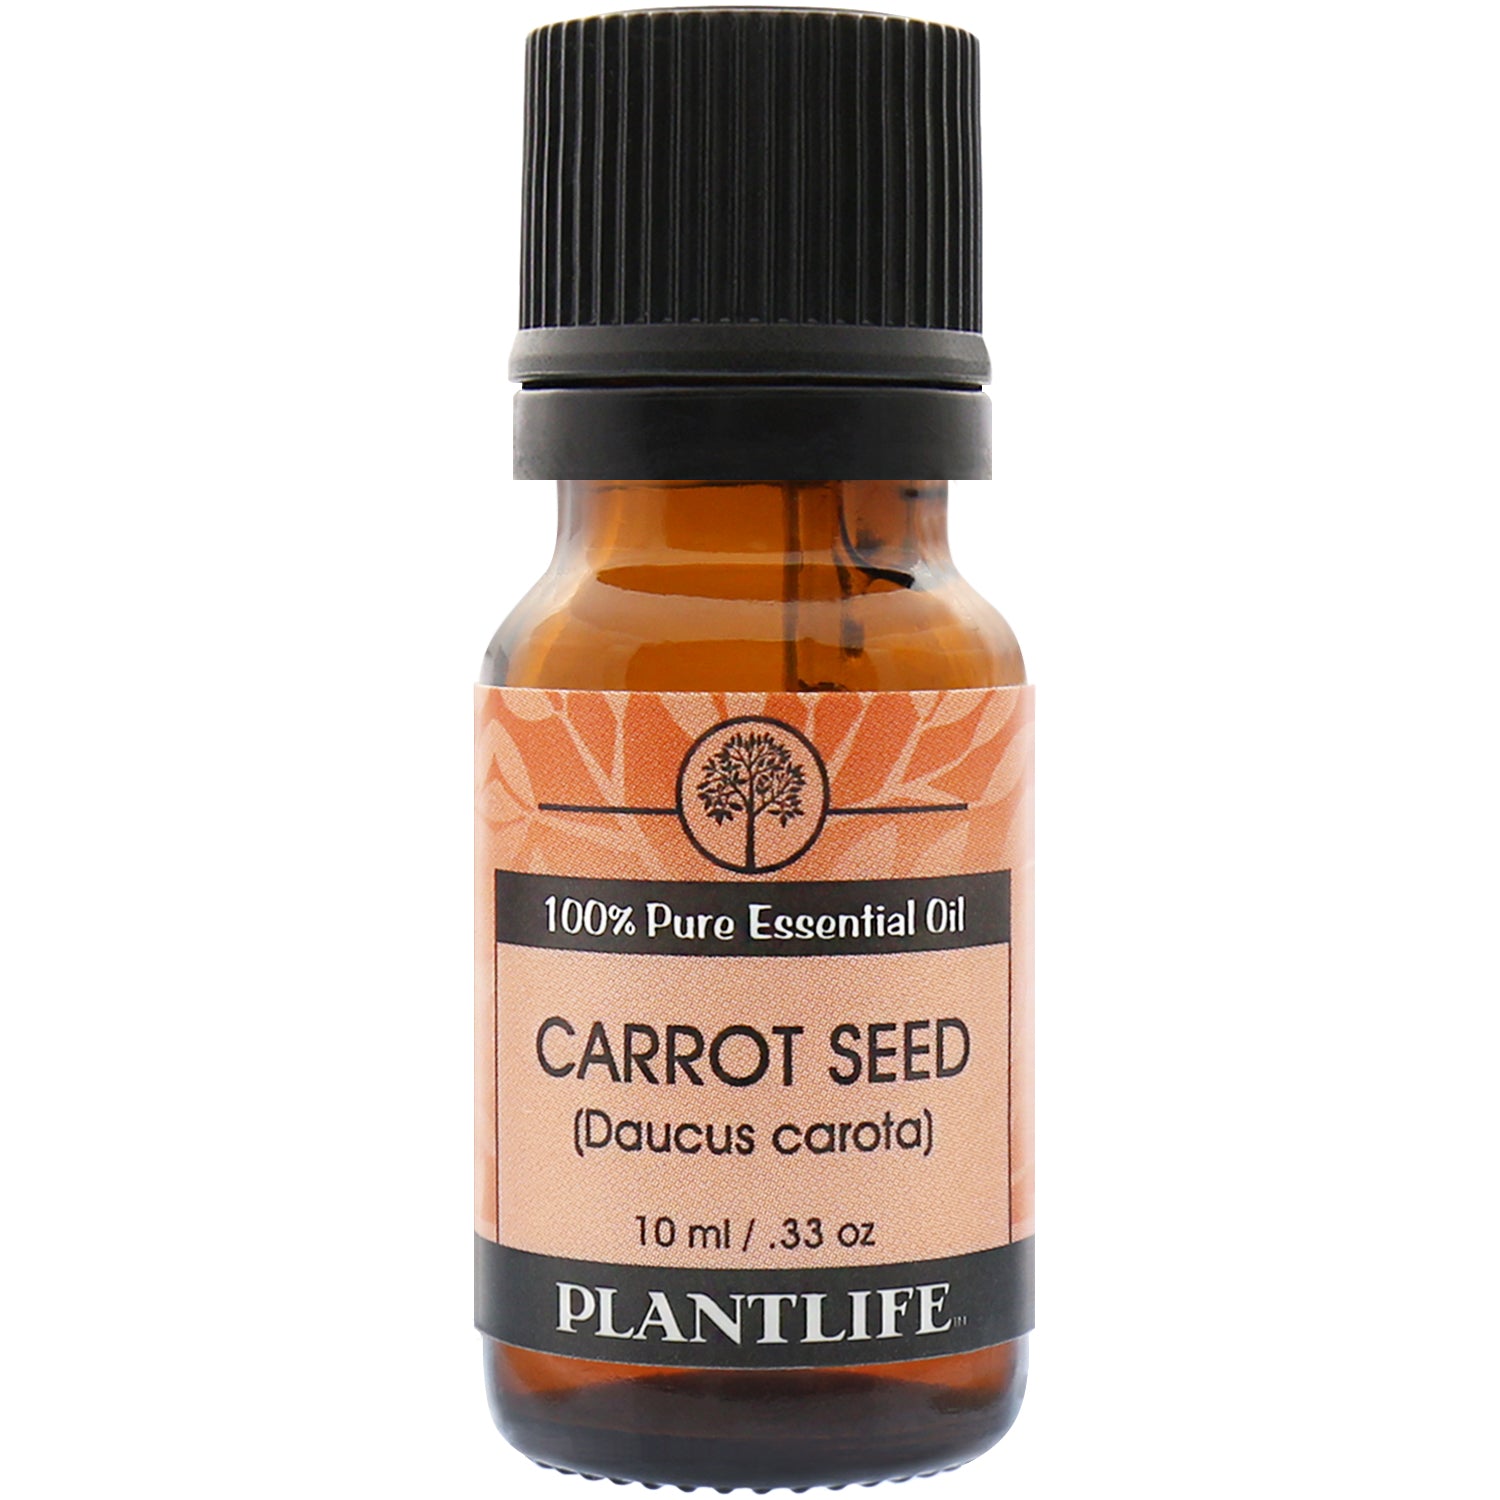 Plantlife Carrot Seed 100% Pure Essential Oil - 10 ml